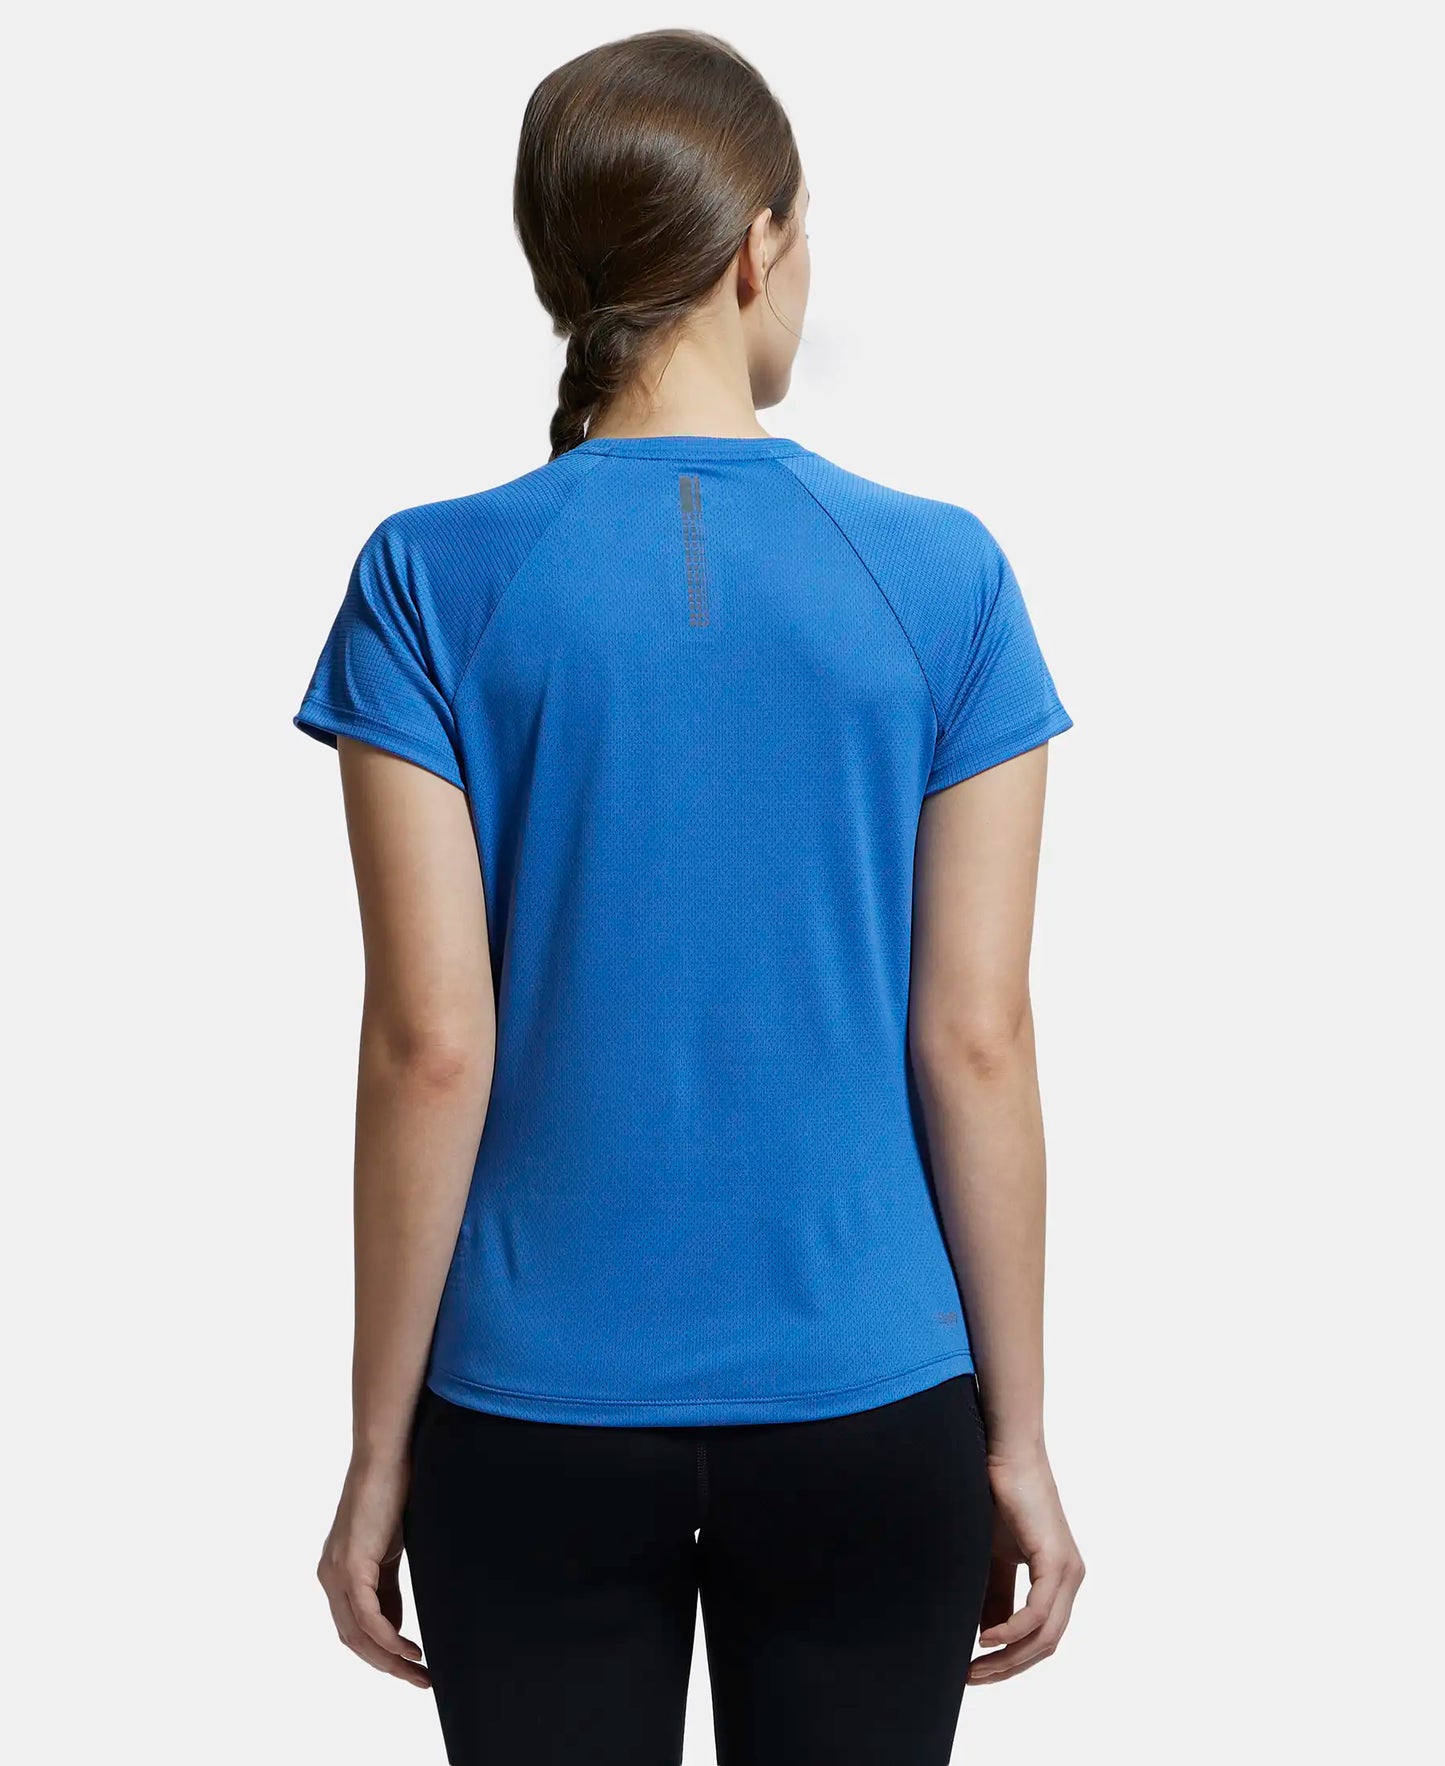 Microfiber Fabric Relaxed Fit Half Sleeve Breathable Mesh T-Shirt - Bright Cobalt-3